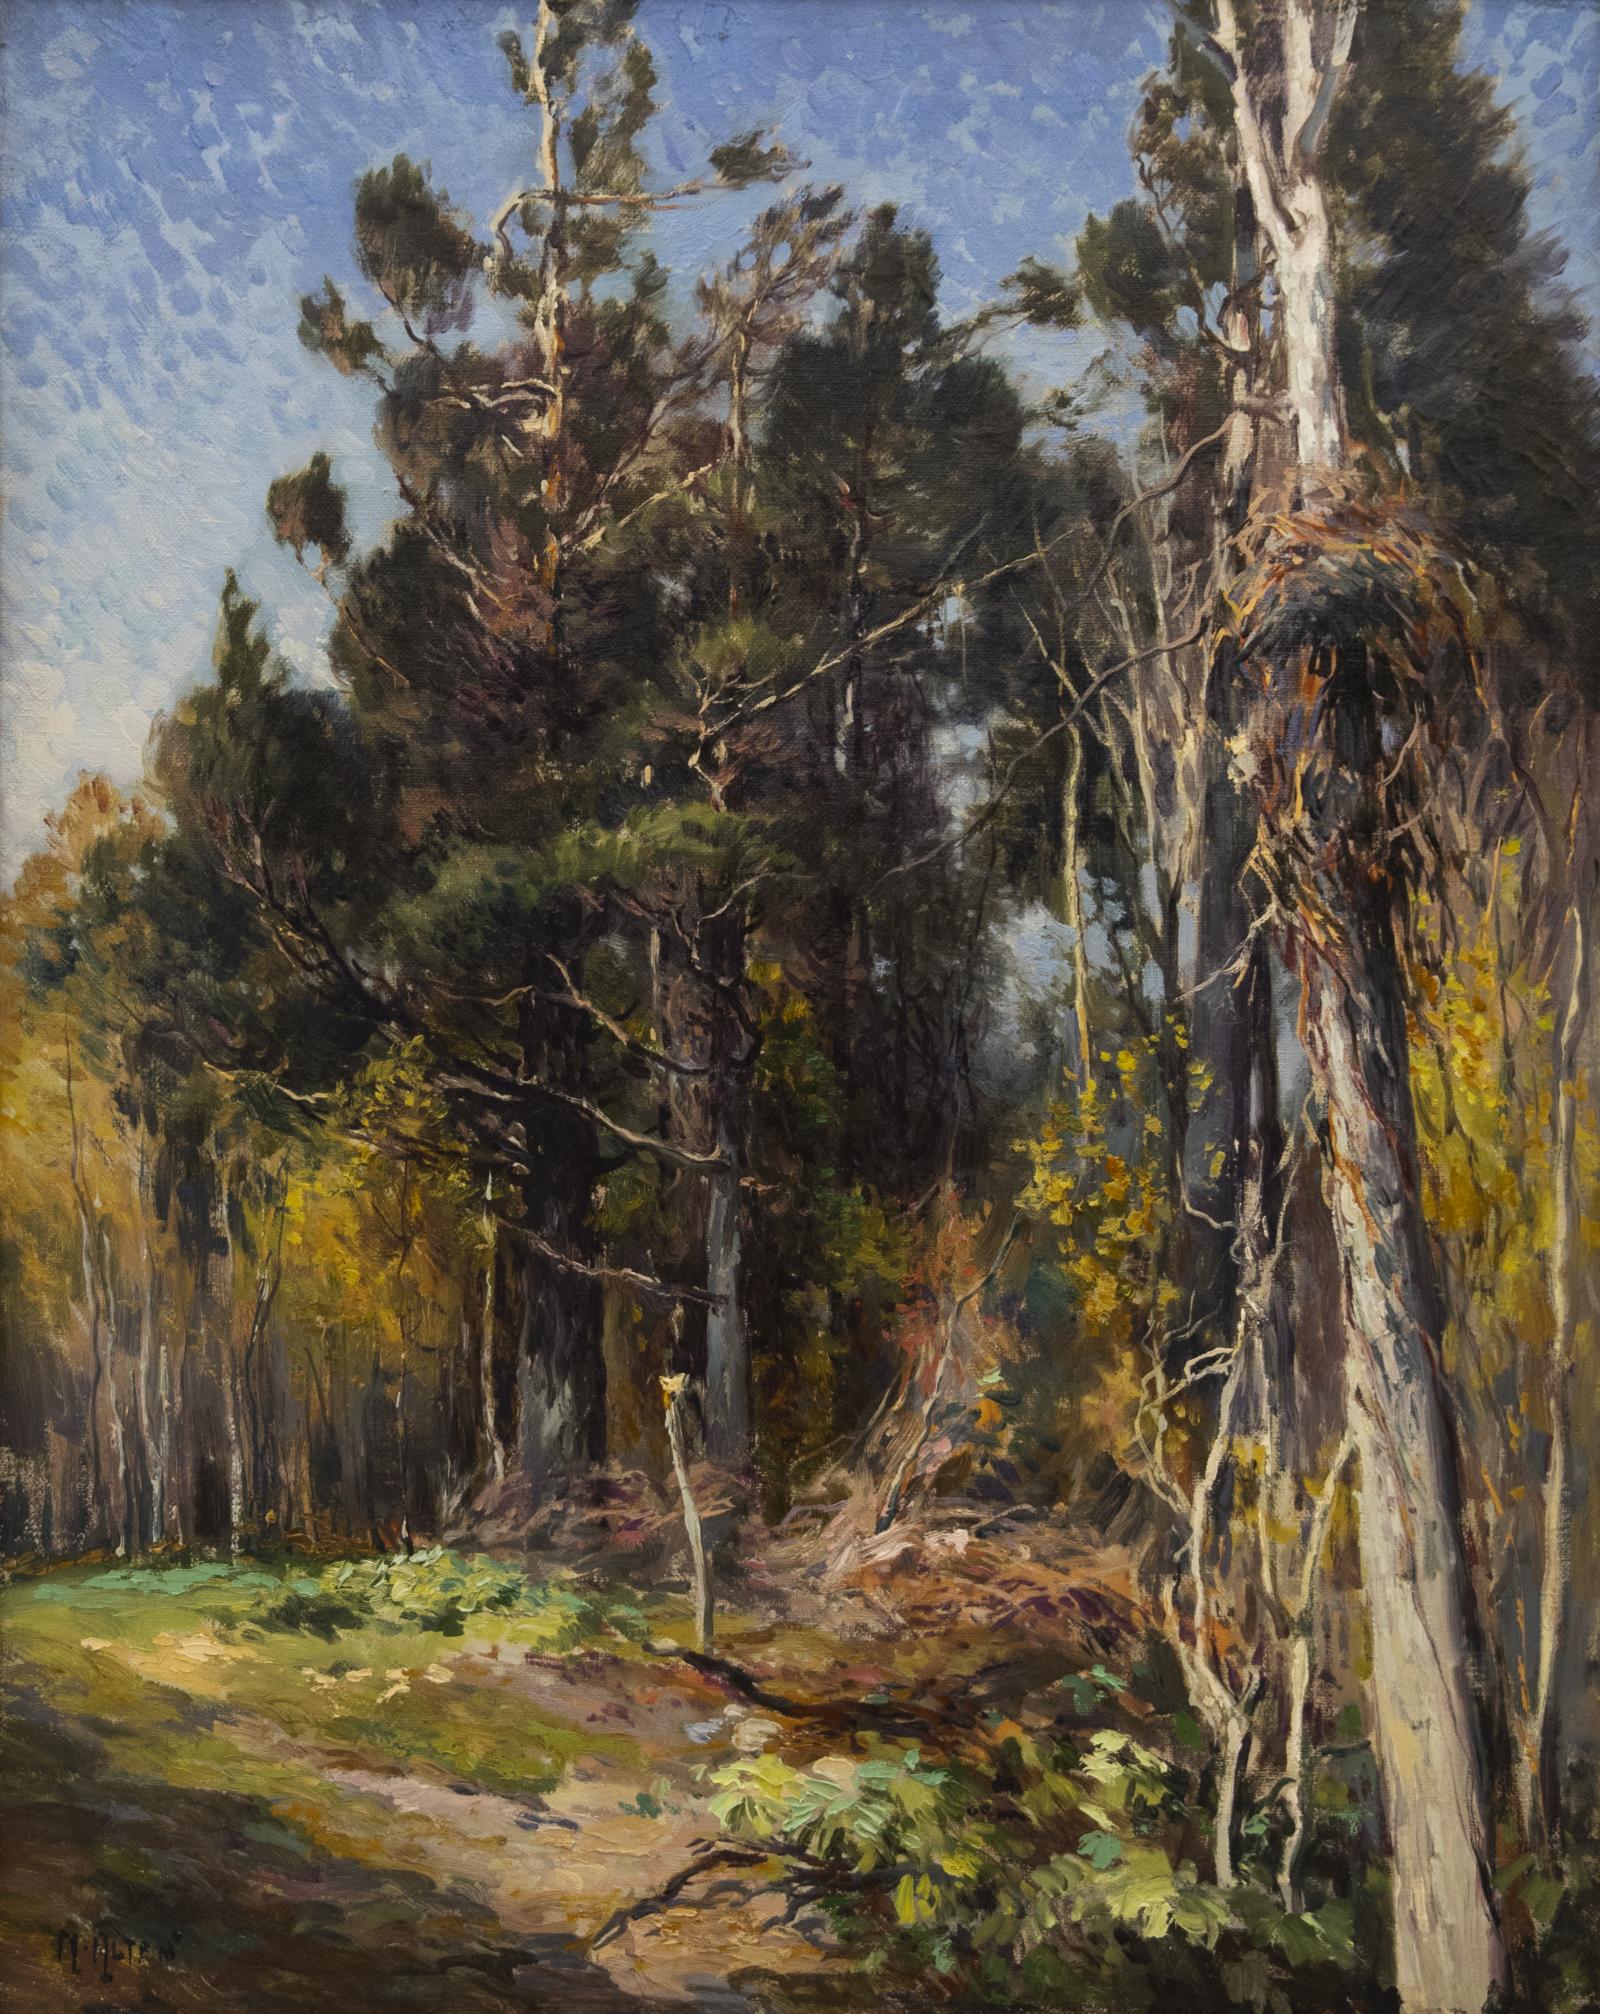 Oil on canvas painting of an area with tall trees and grass.